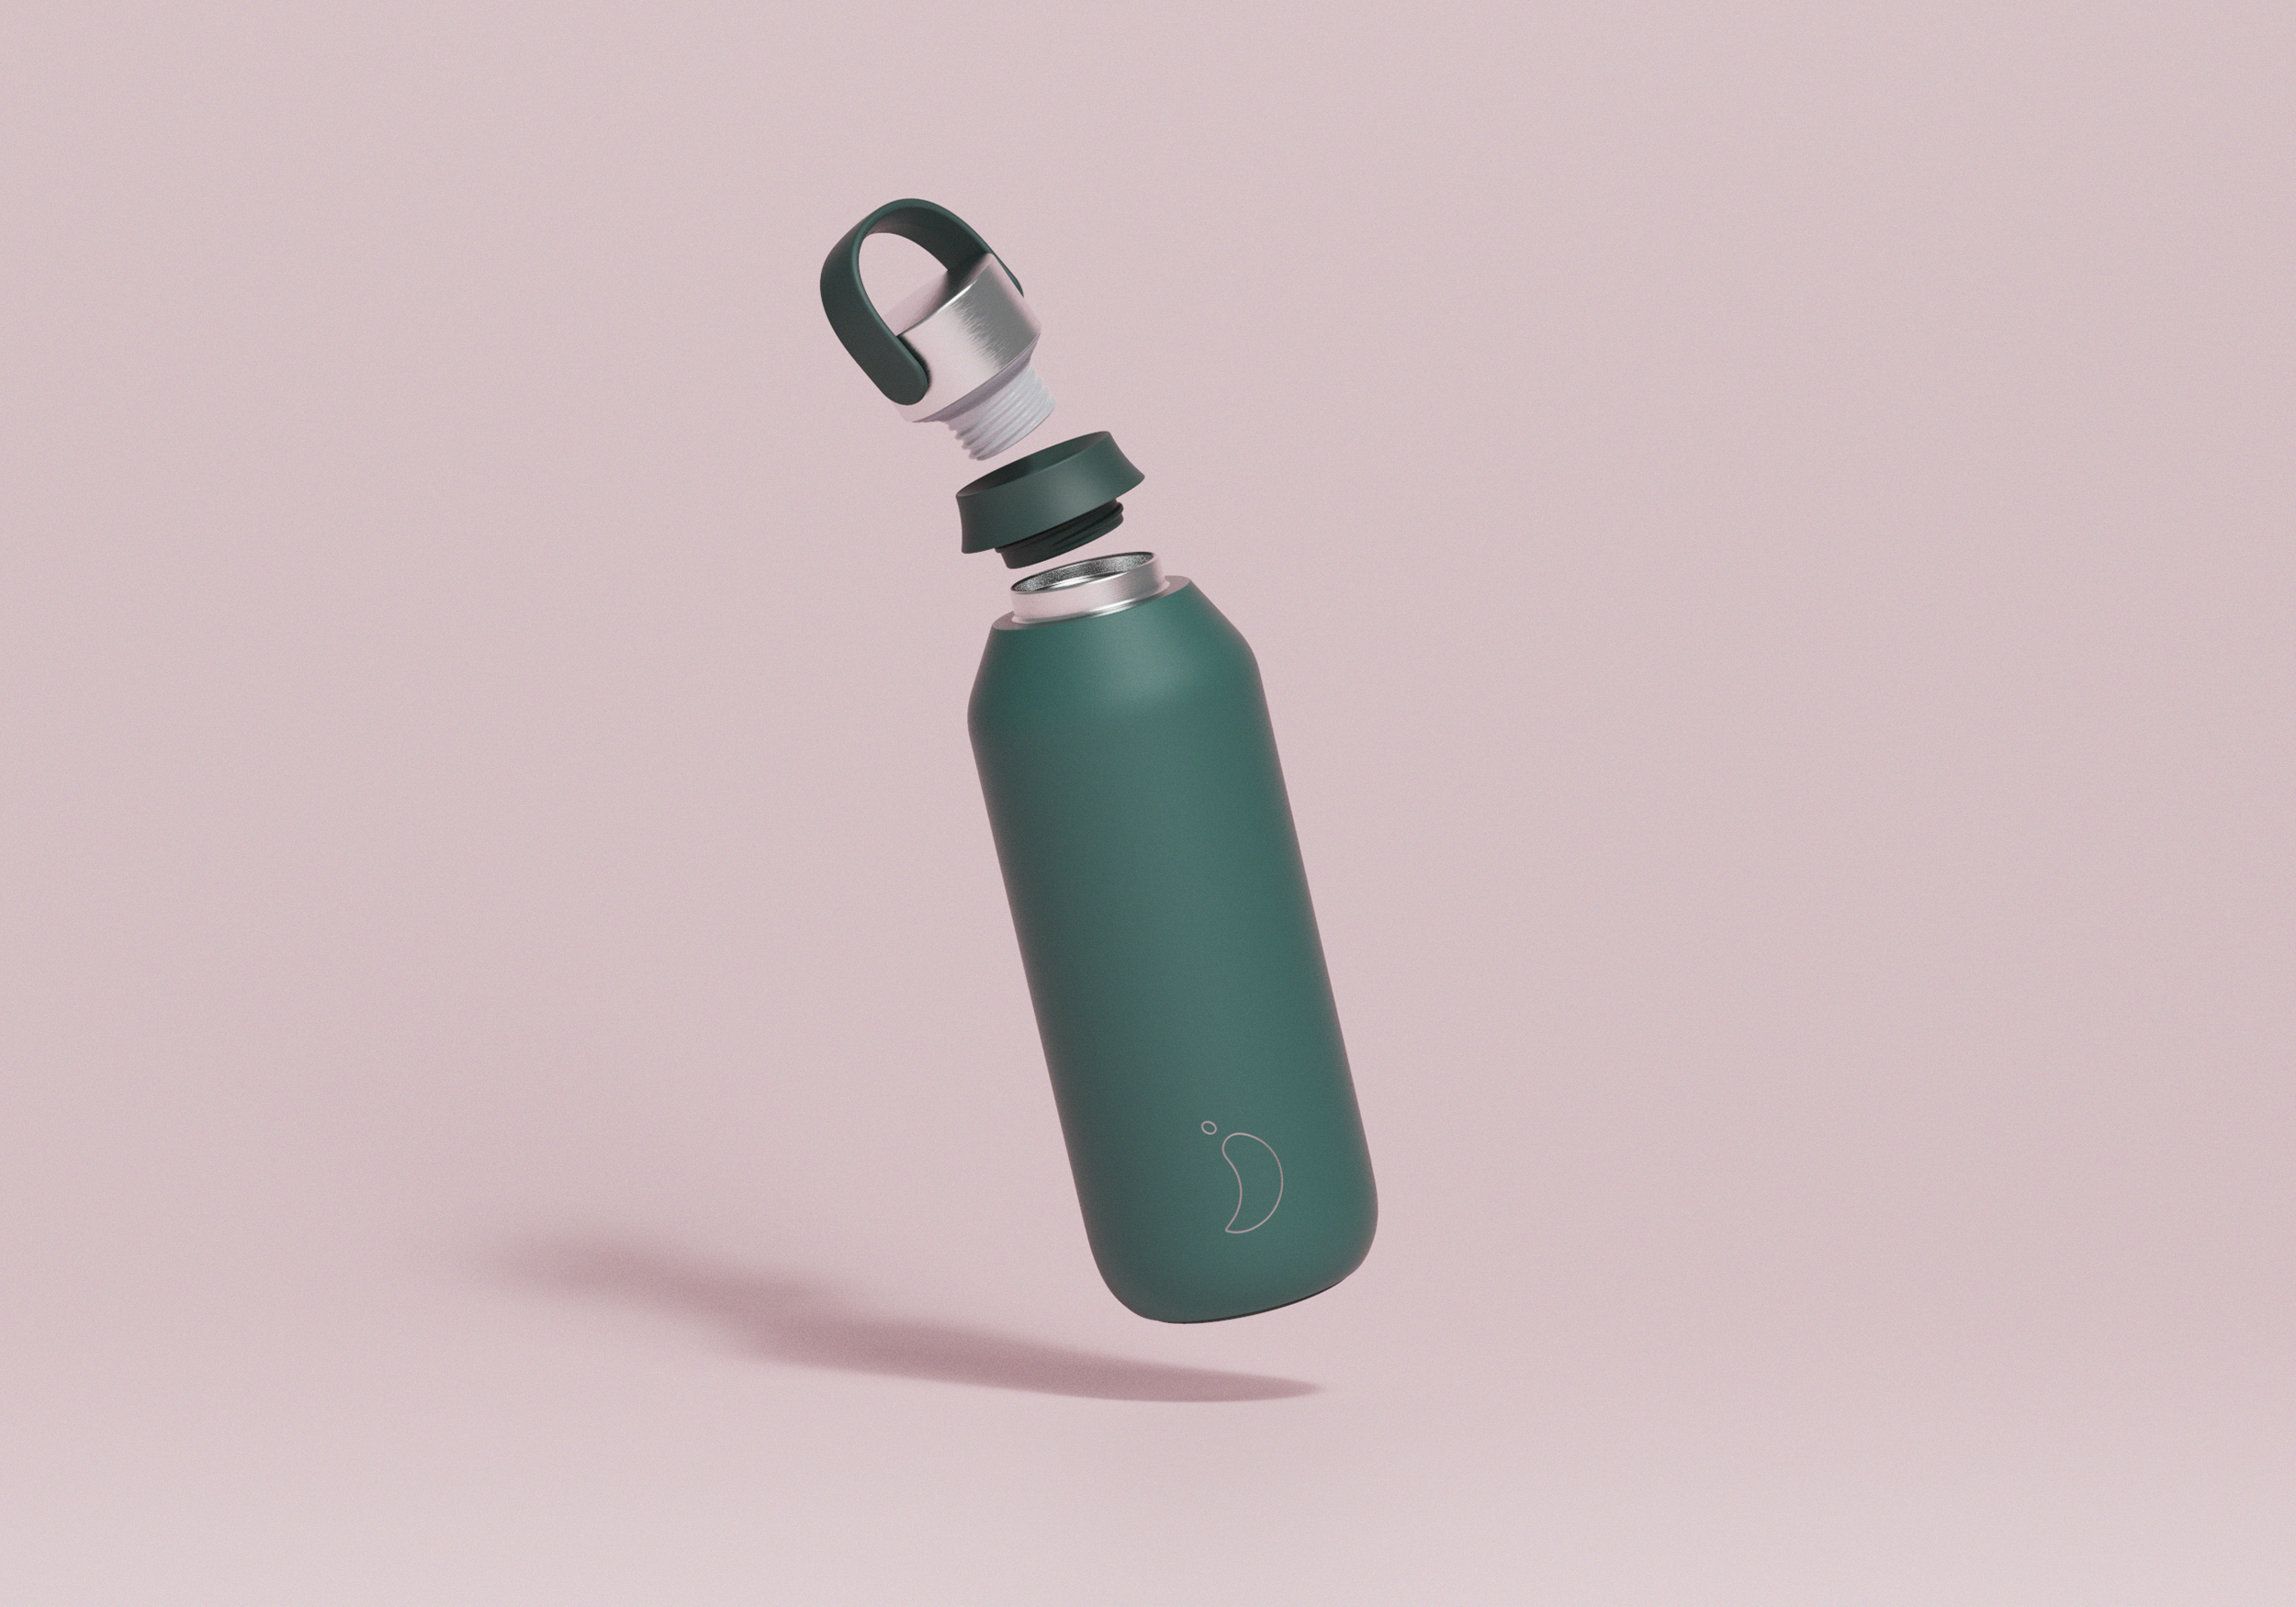 Chilly's Bottles Product CGI / Animation